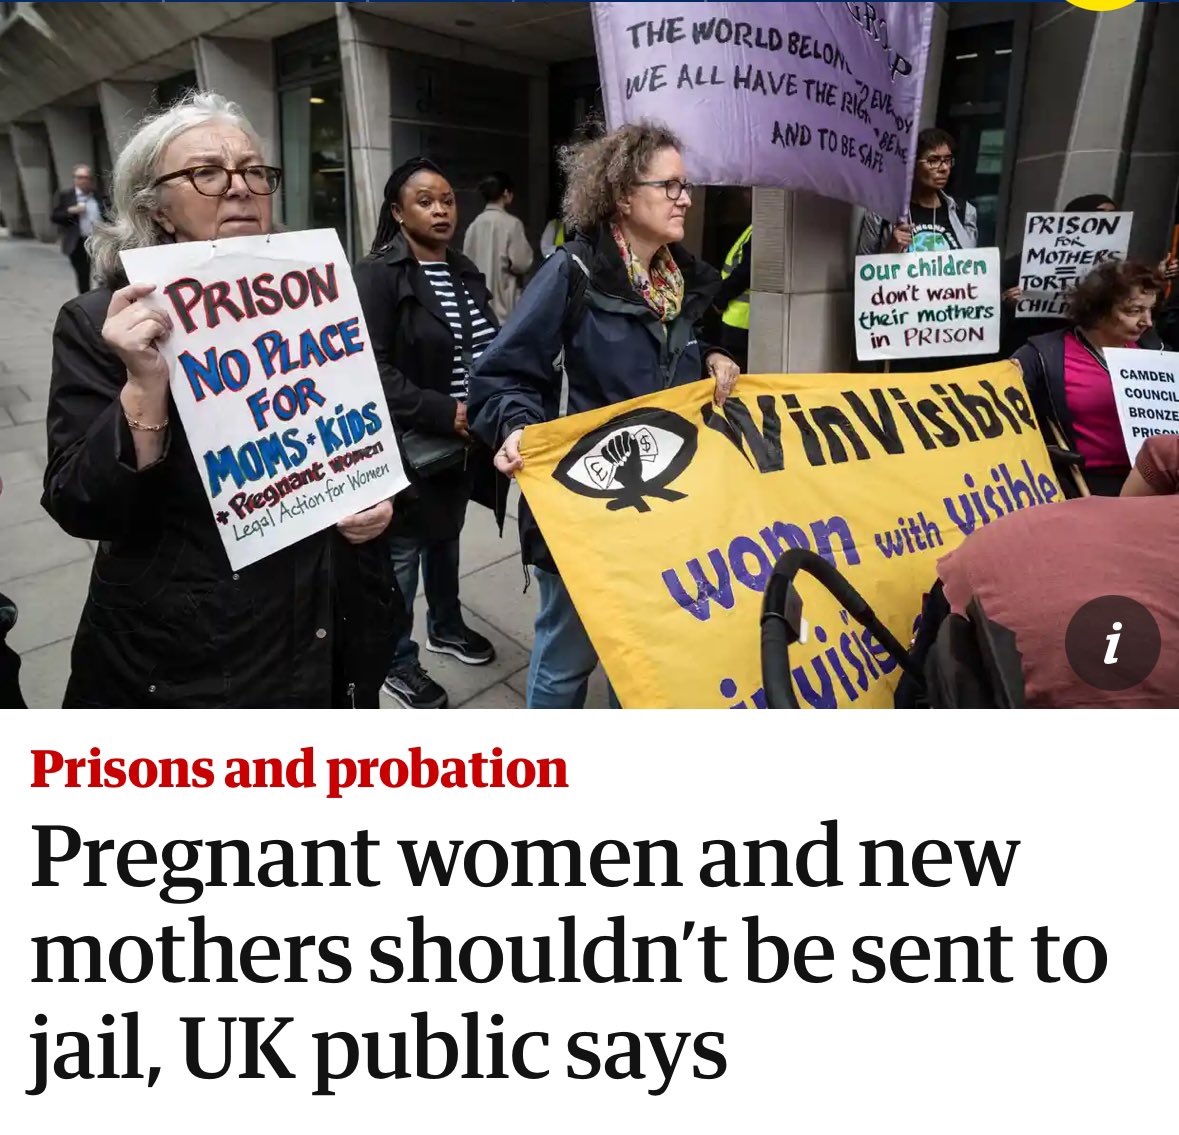 “For a pregnant woman or mother, the punishment of prison is doubled” New polling shows the public support sentencing reform for pregnant women and new mothers! Time for the @SentencingCCL to act. Full report in @ObserverUK by @eve_rebecca: amp.theguardian.com/society/2024/f…